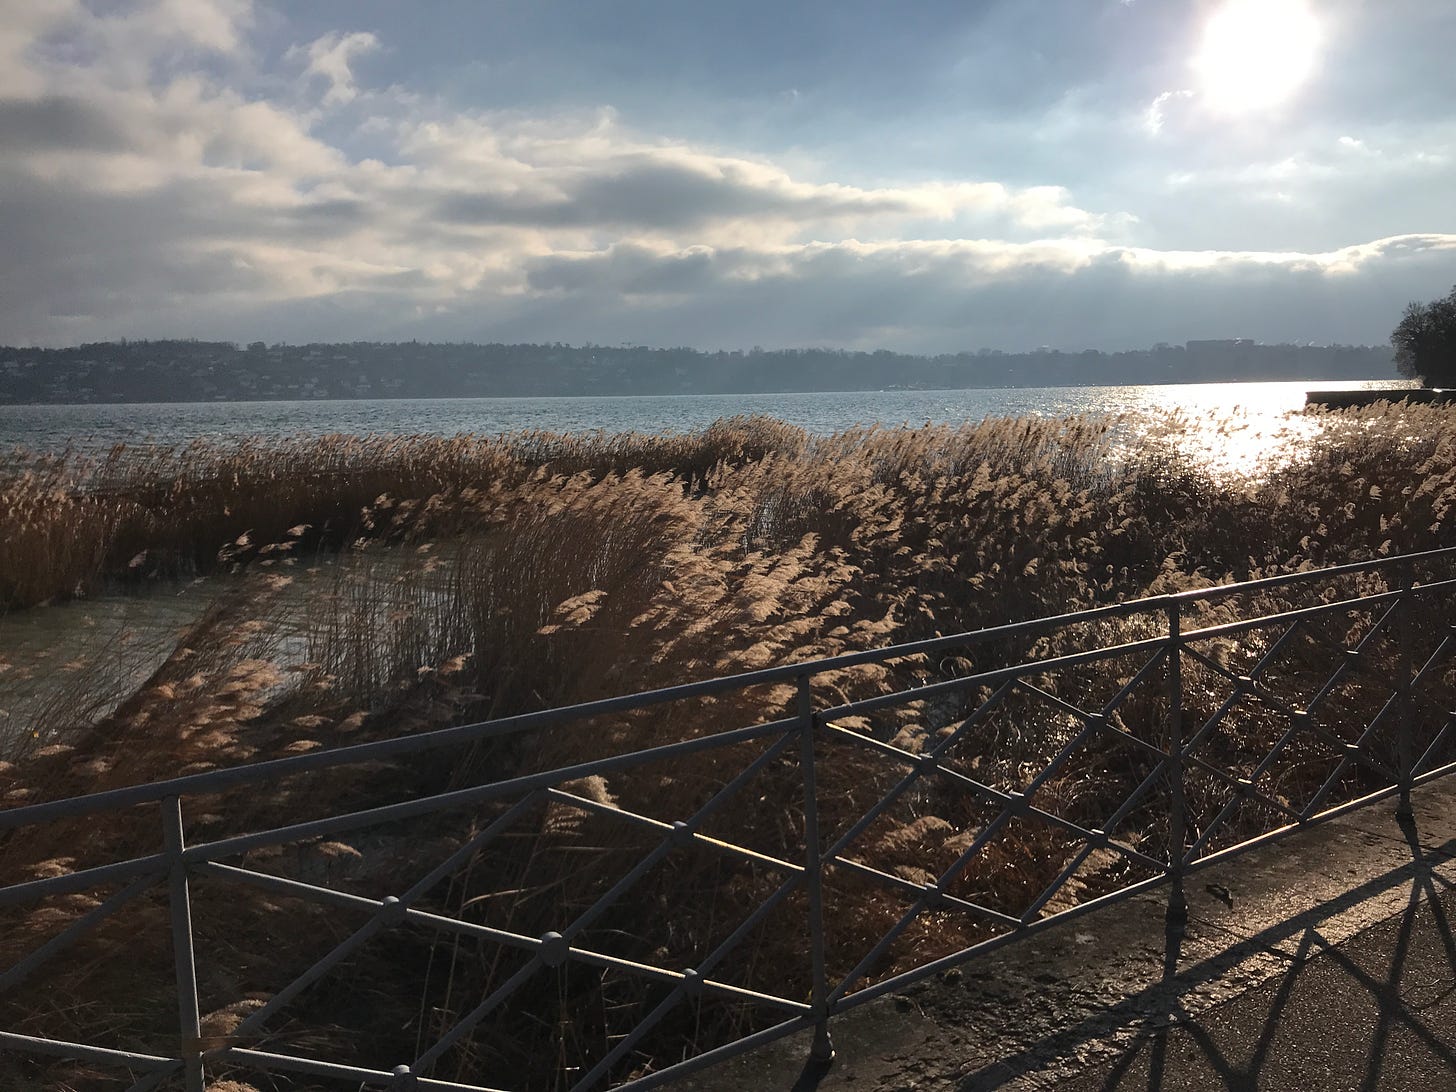 Wintry reeds blow in the wind in shining Lake Geneva on a cold, sunny day.